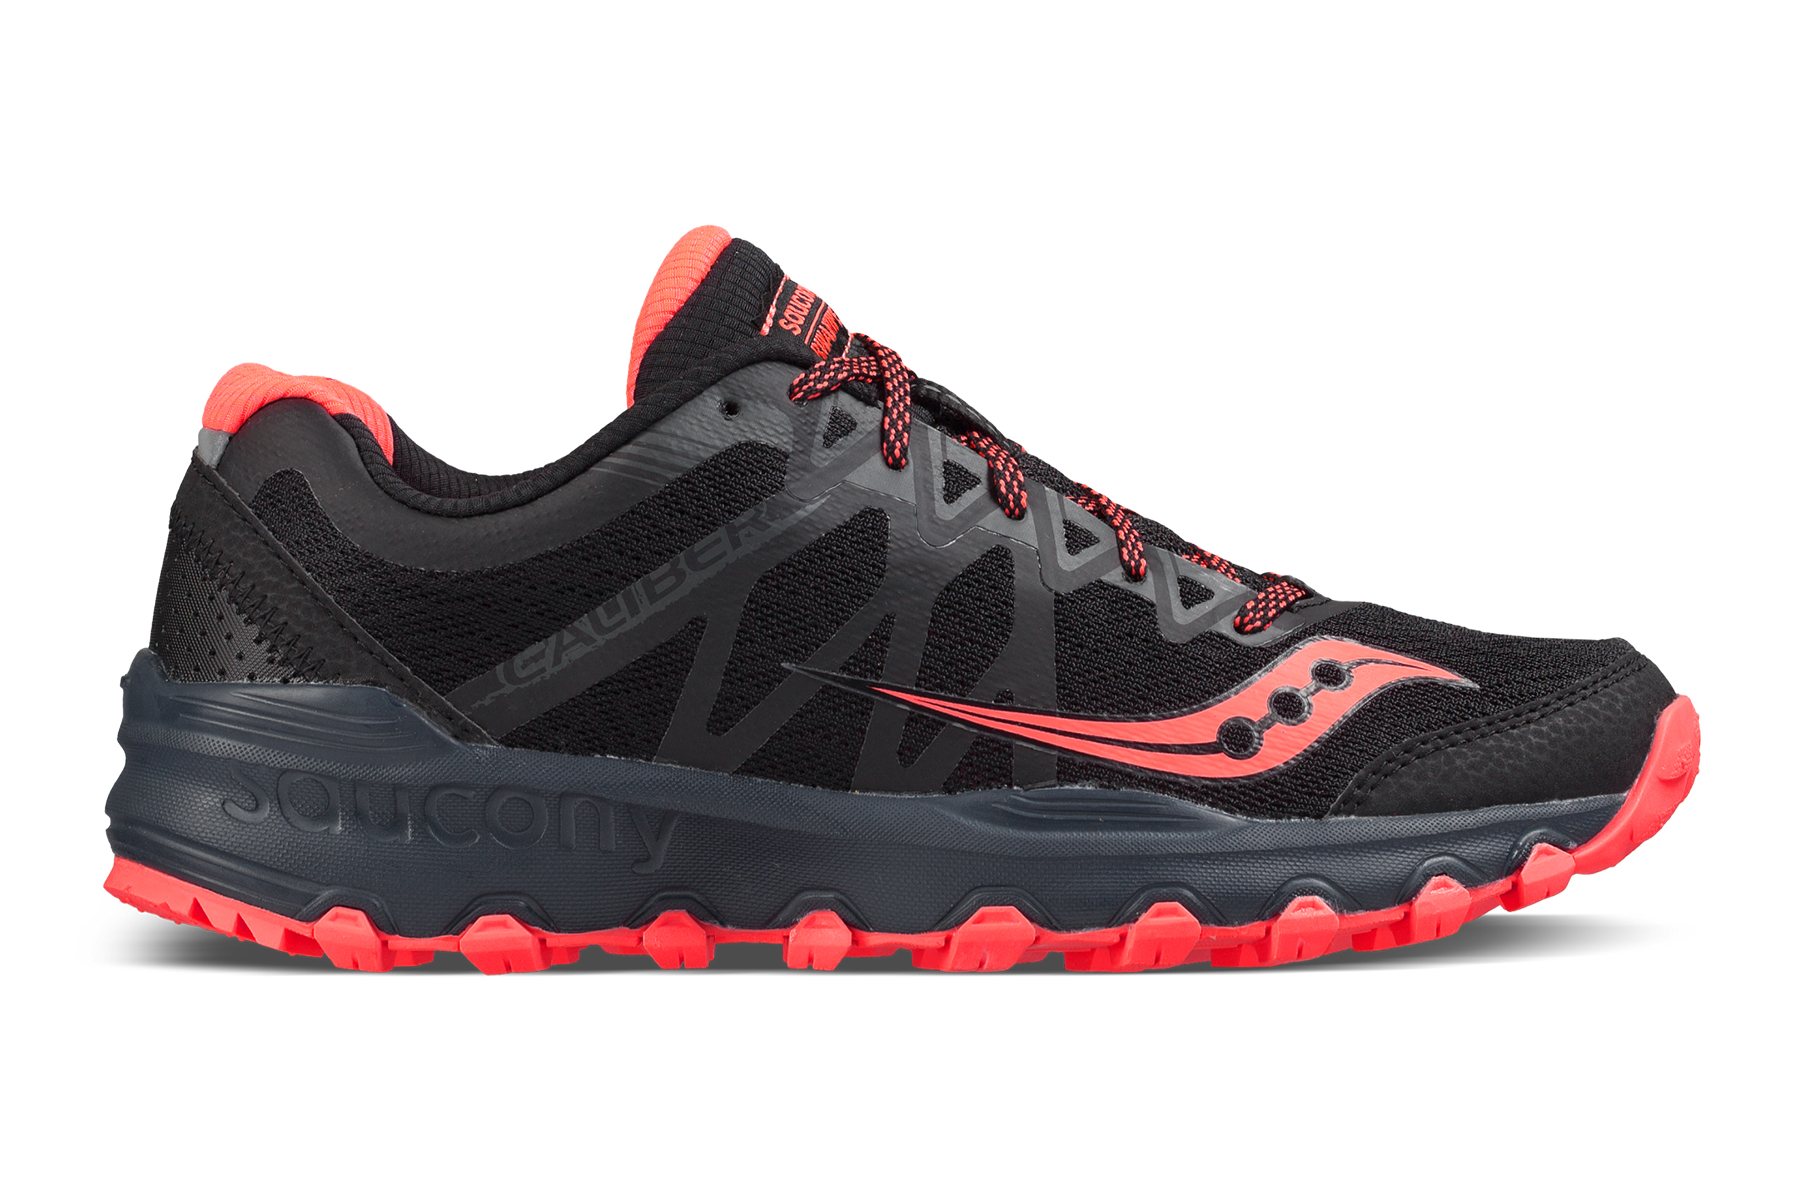 Red Black Saucony Grid Caliber Trail Shoes Grey 